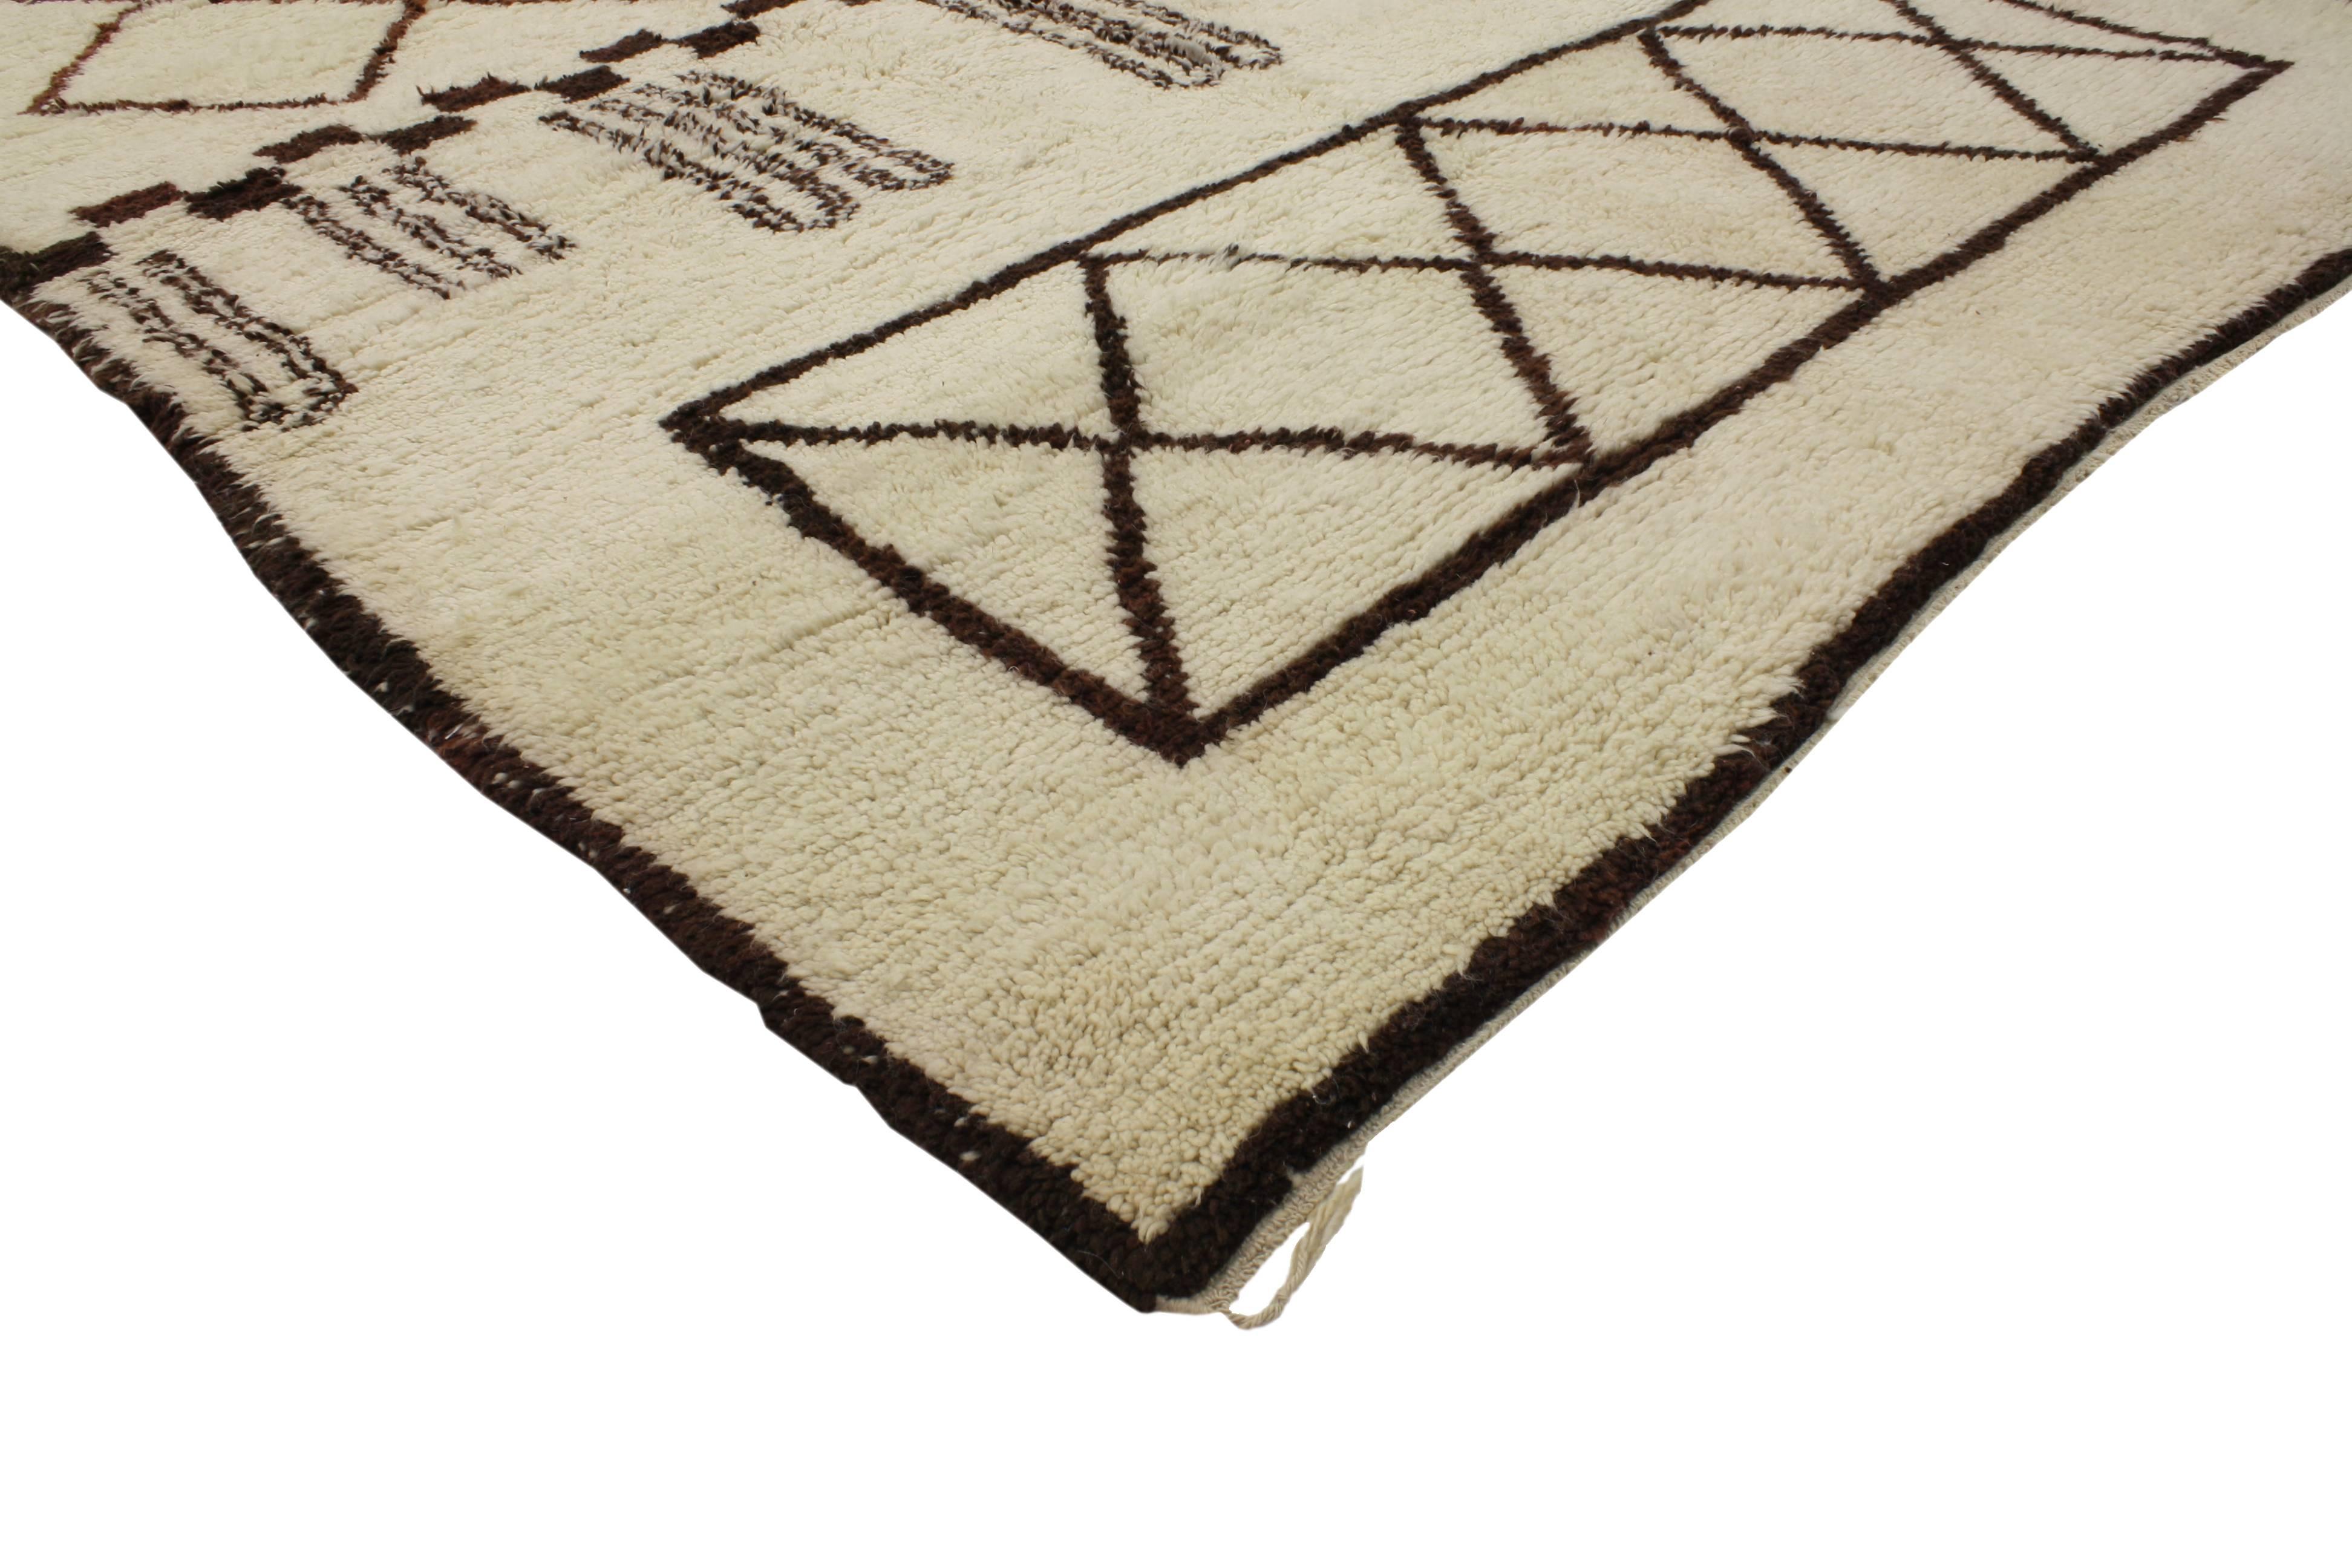 Bauhaus New Contemporary Berber Moroccan Rug with Mid-Century Modern Style For Sale